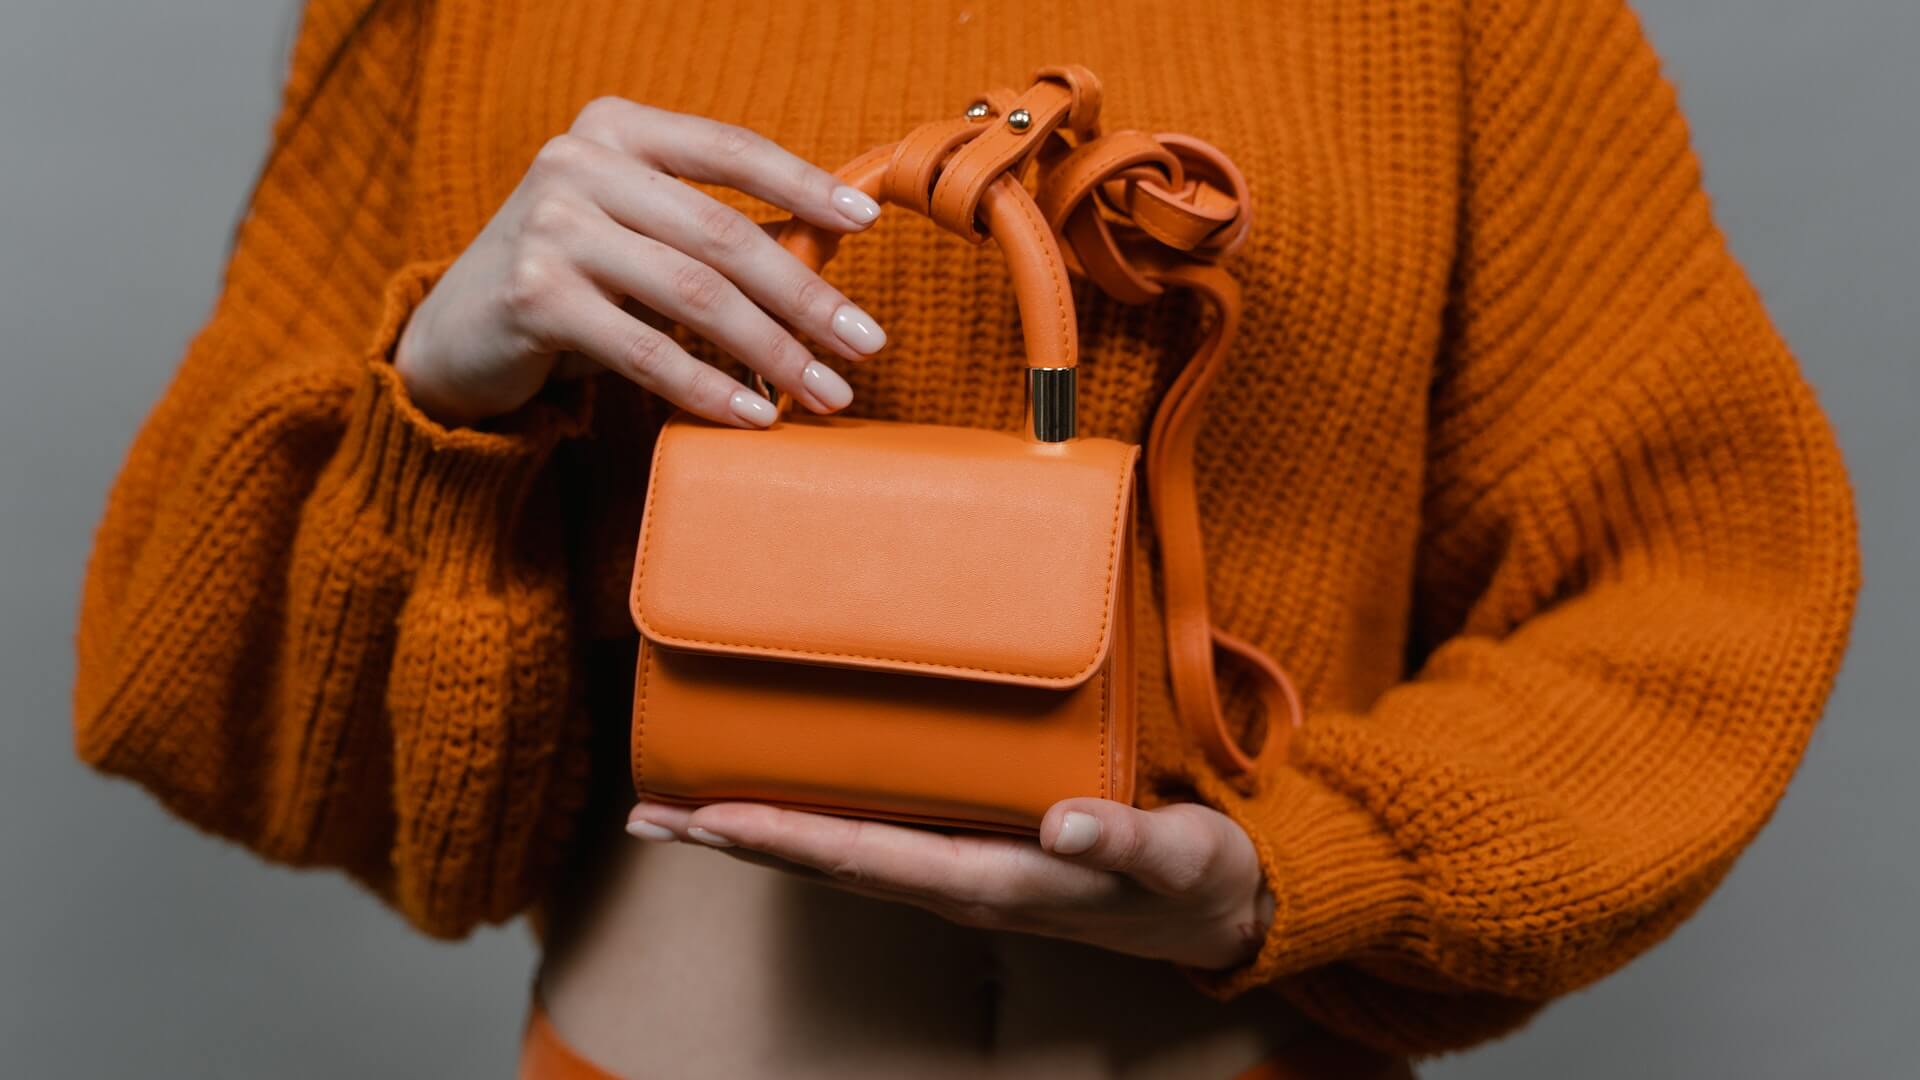 The Ultimate Guide To Choosing The Perfect Handbag